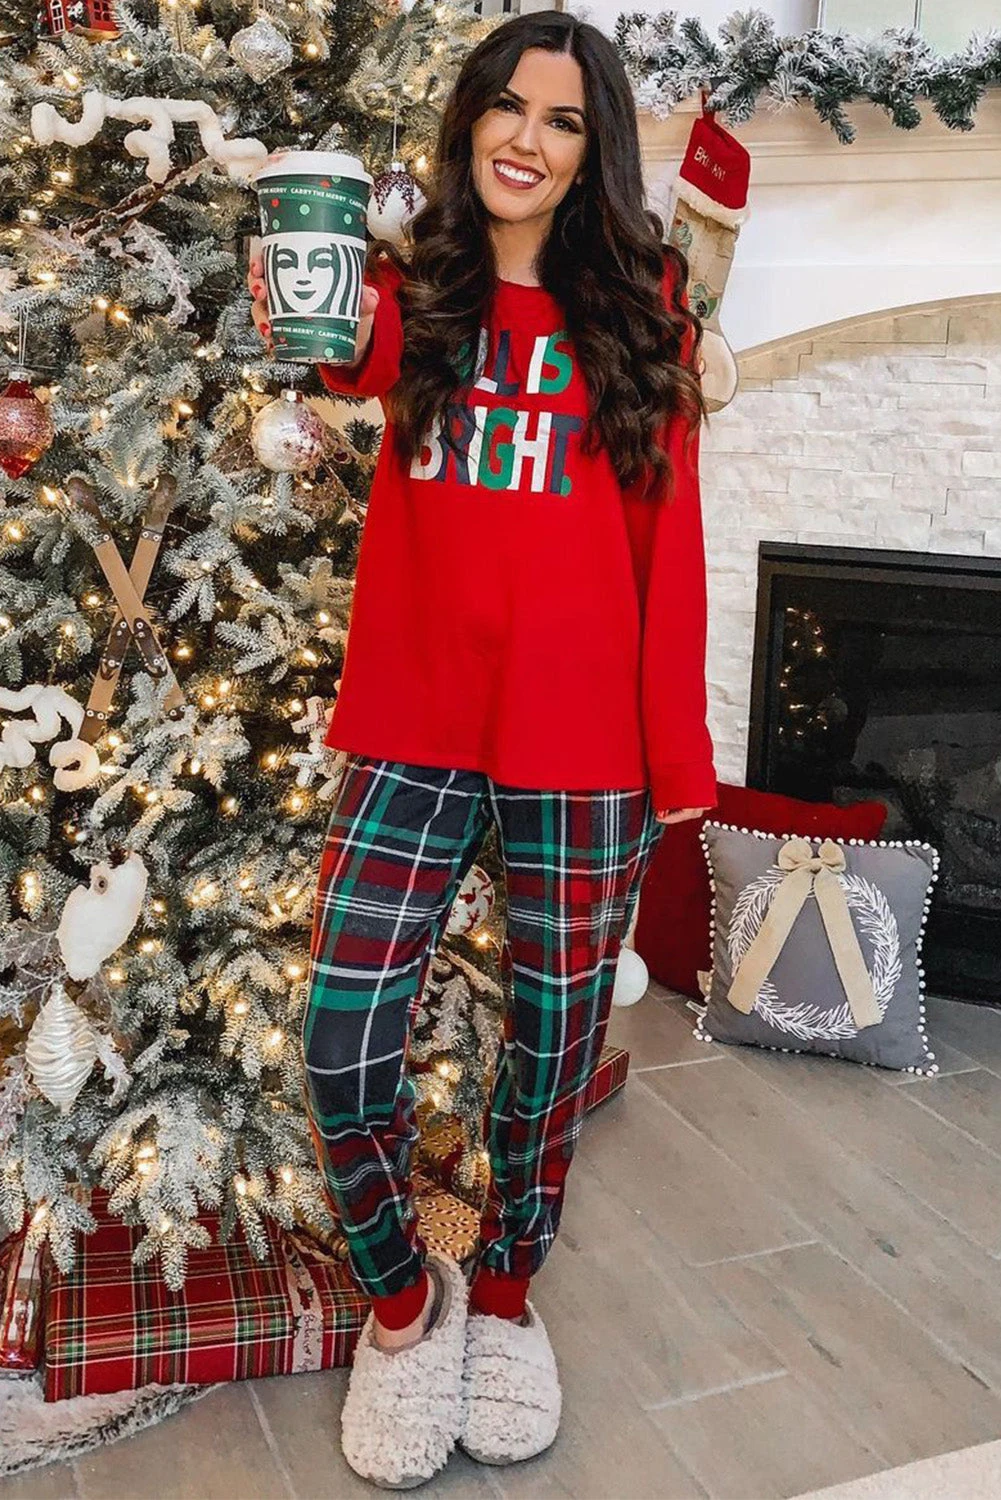 Dear-Lover Wholesale Family Multicolor All Is Bright Graphic Plaid Nightmare Pajamas Before Christmas